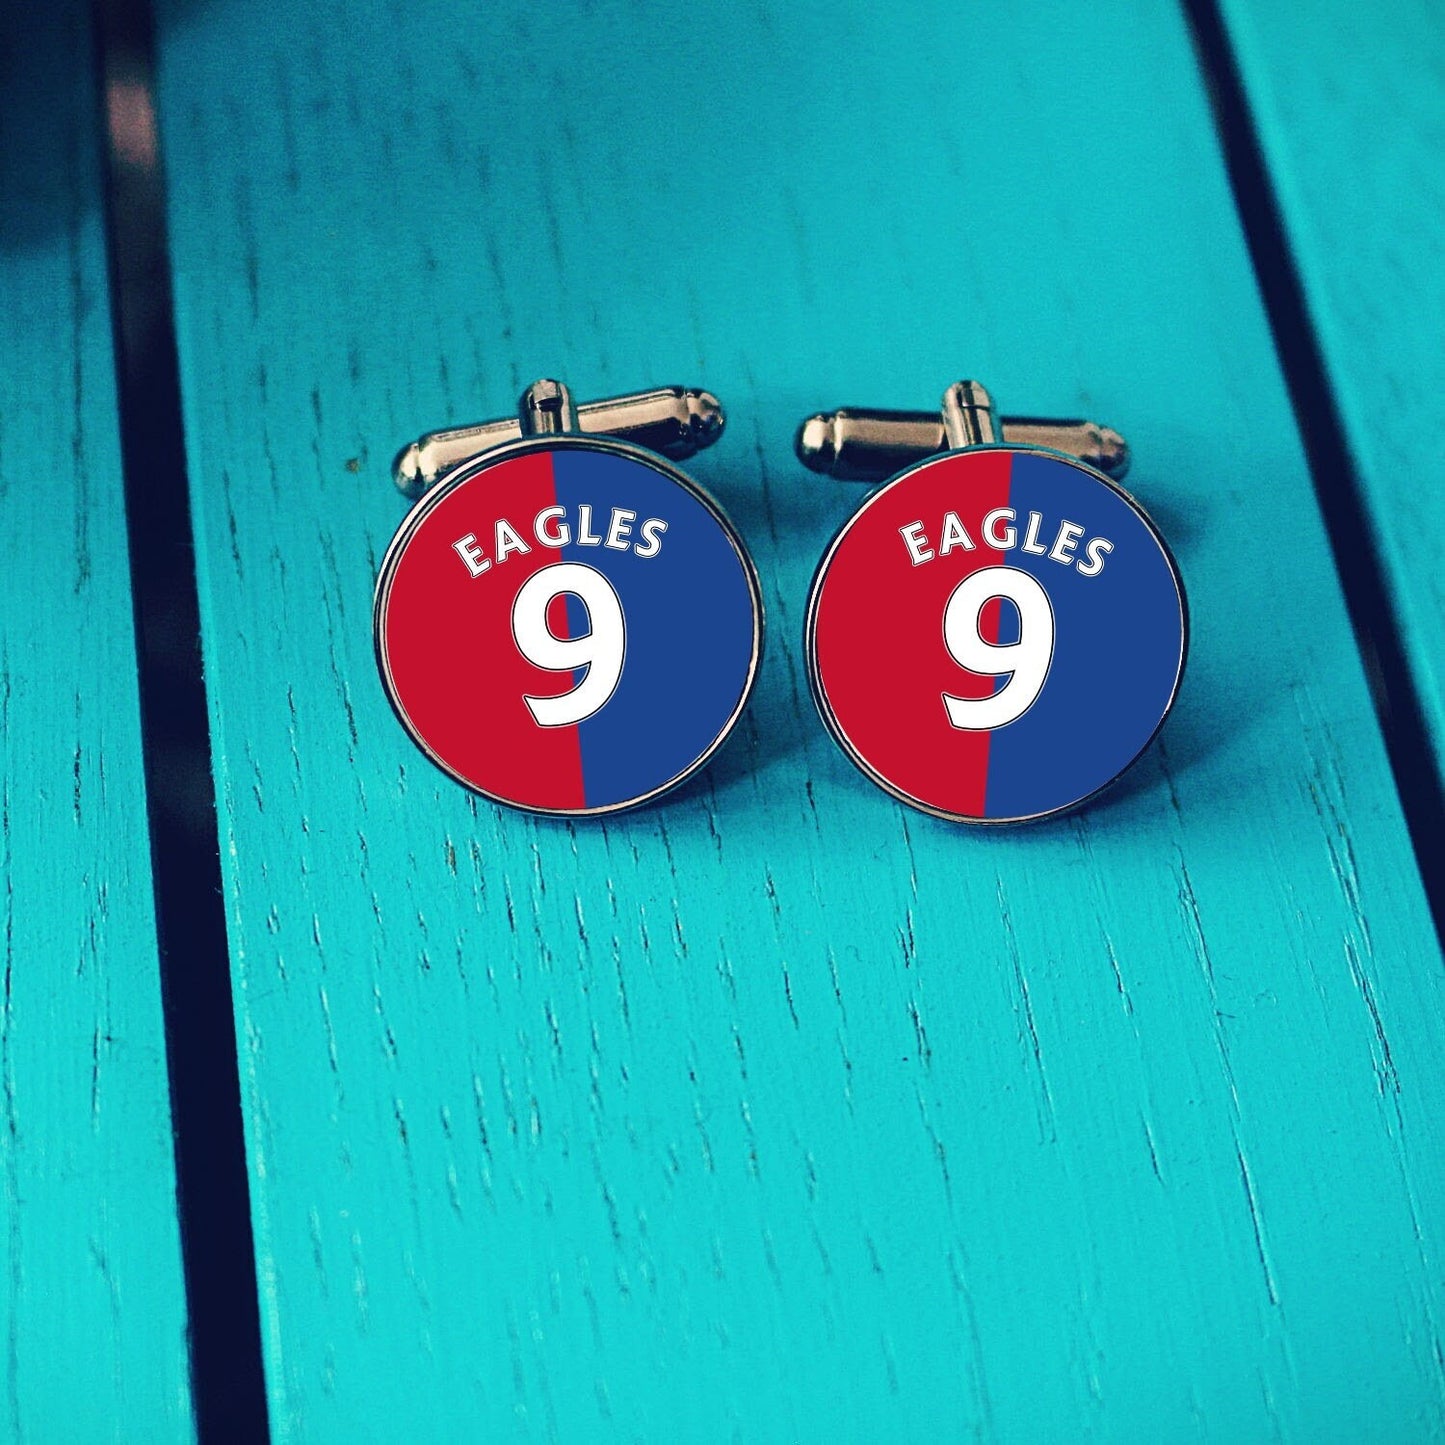 Crystal Palace Football Shirt Cufflinks. Selhurst Park Stadium. Gift for Eagles Fan. Road Sign Tie Bar. Personalised Name and Number.